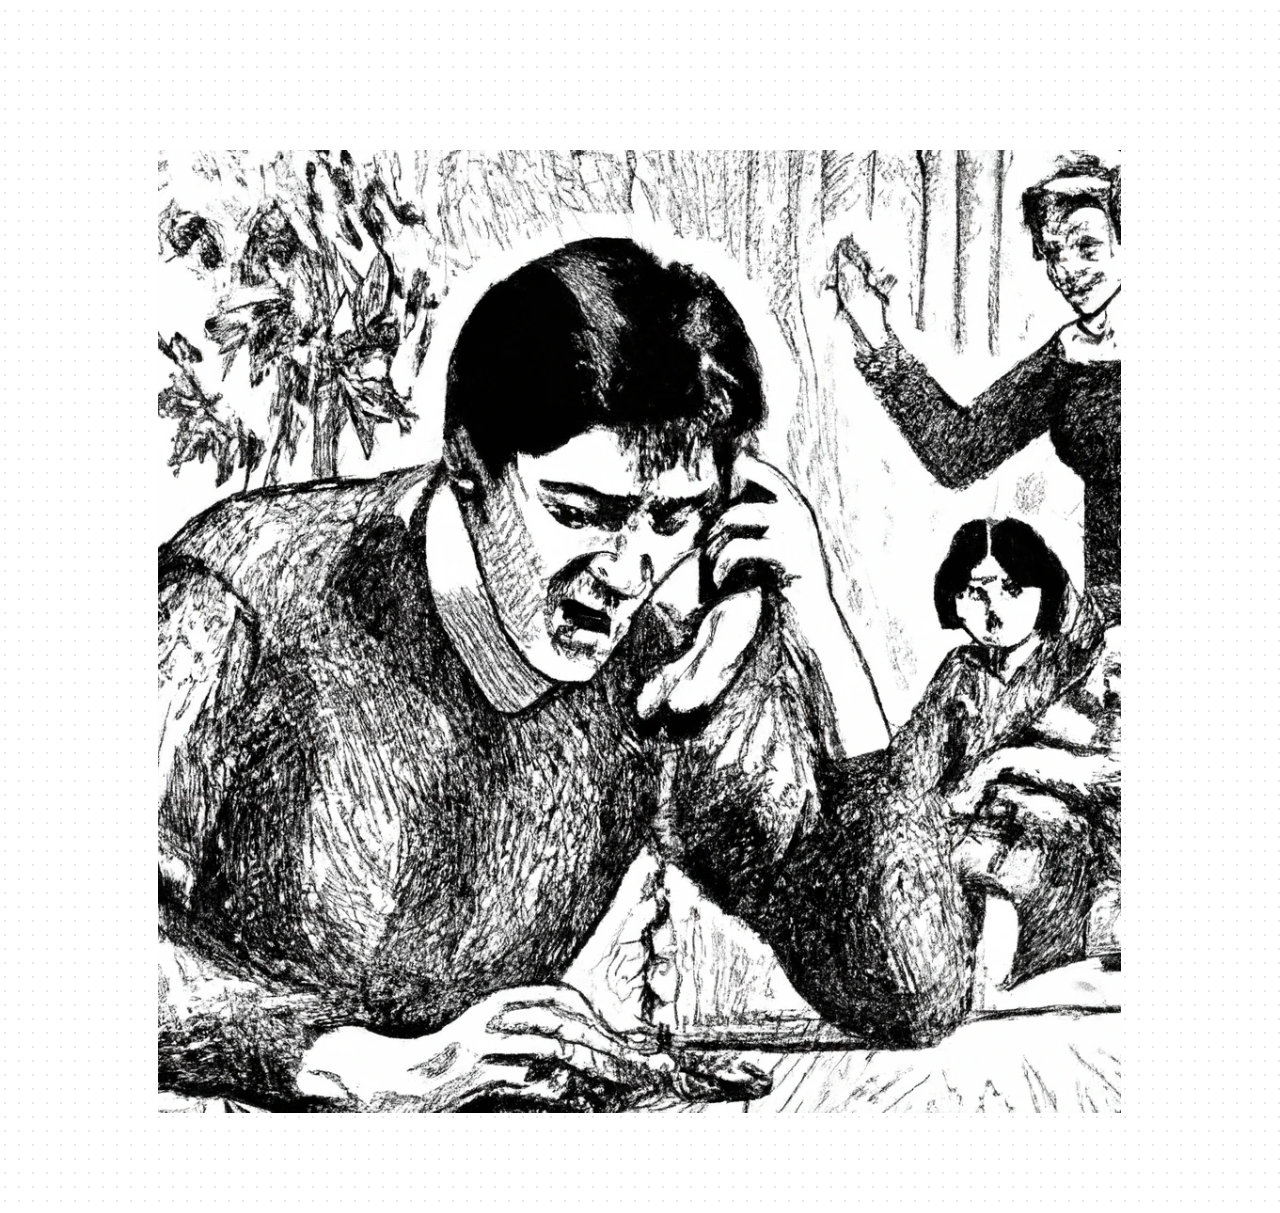 Dall-e2 Query: hatching style, man on phone stressed, family in background